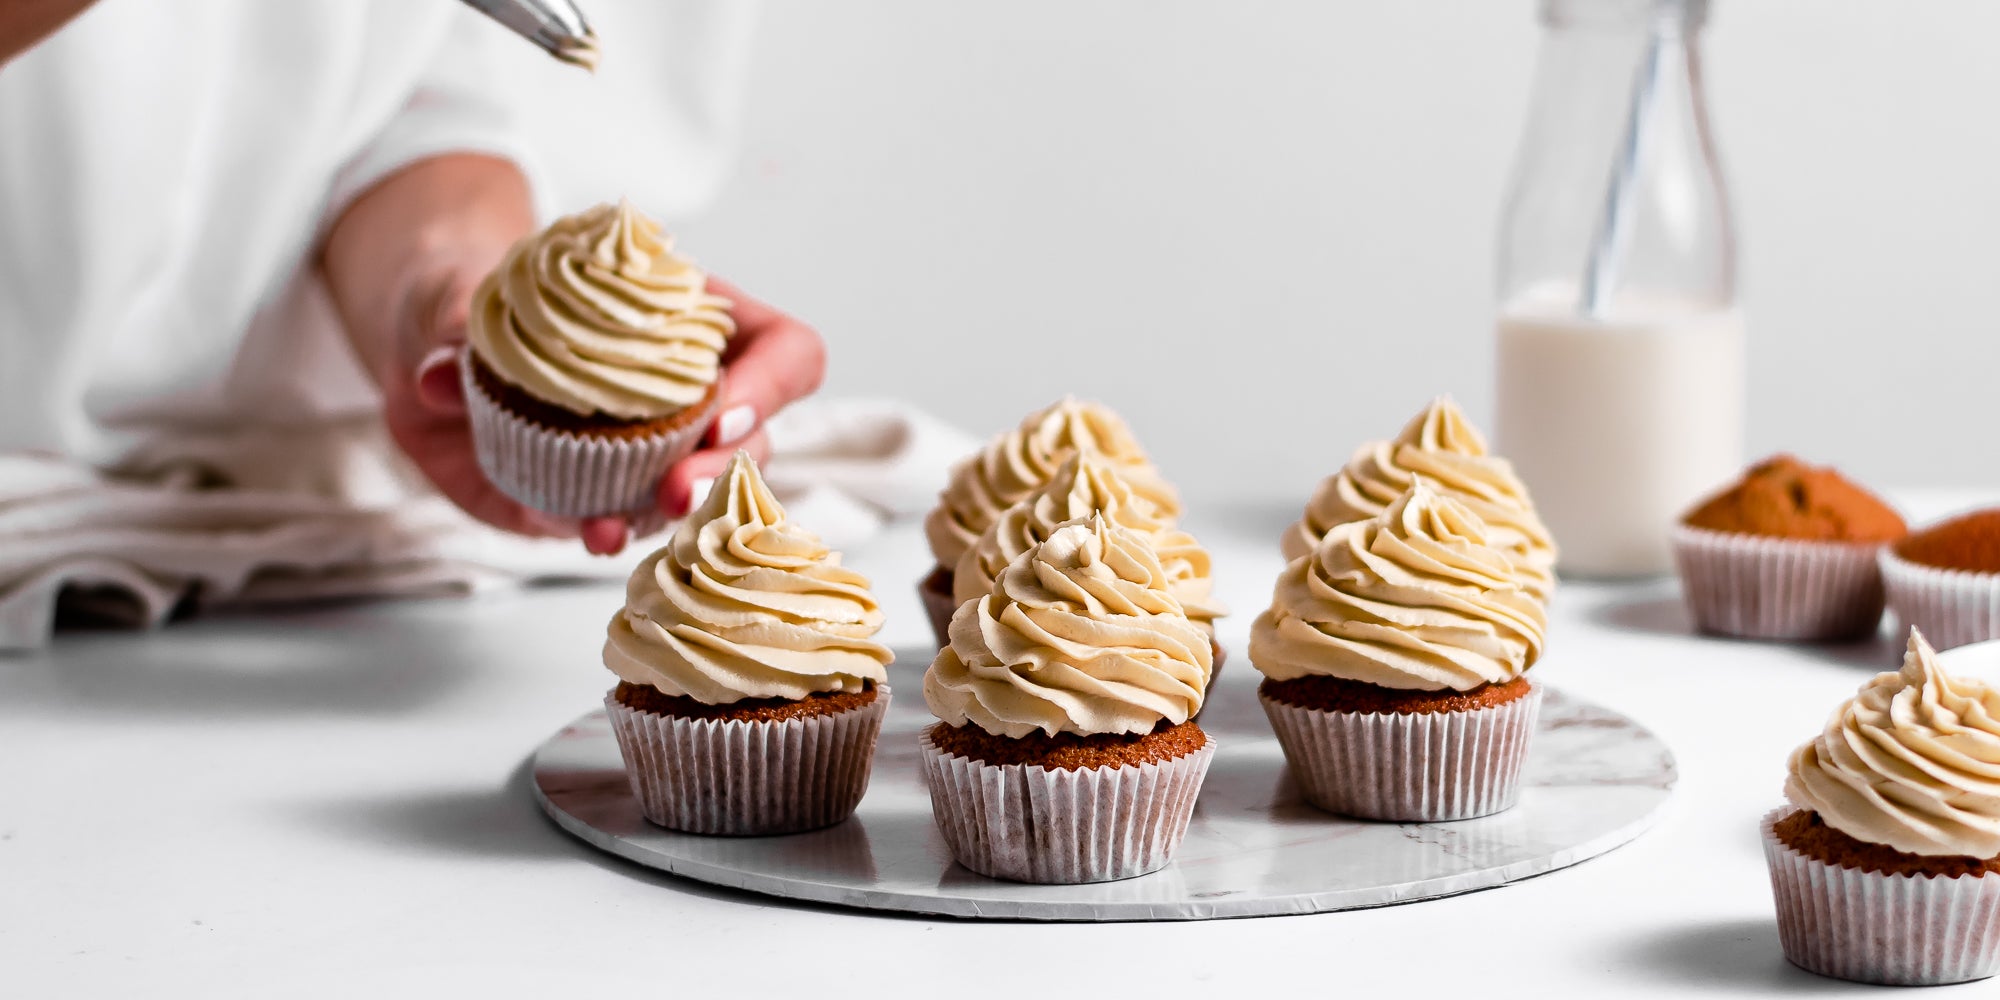 Gingerbread Cinnamon Cupcakes on a plate, being hand decorated with caramel buttercream.